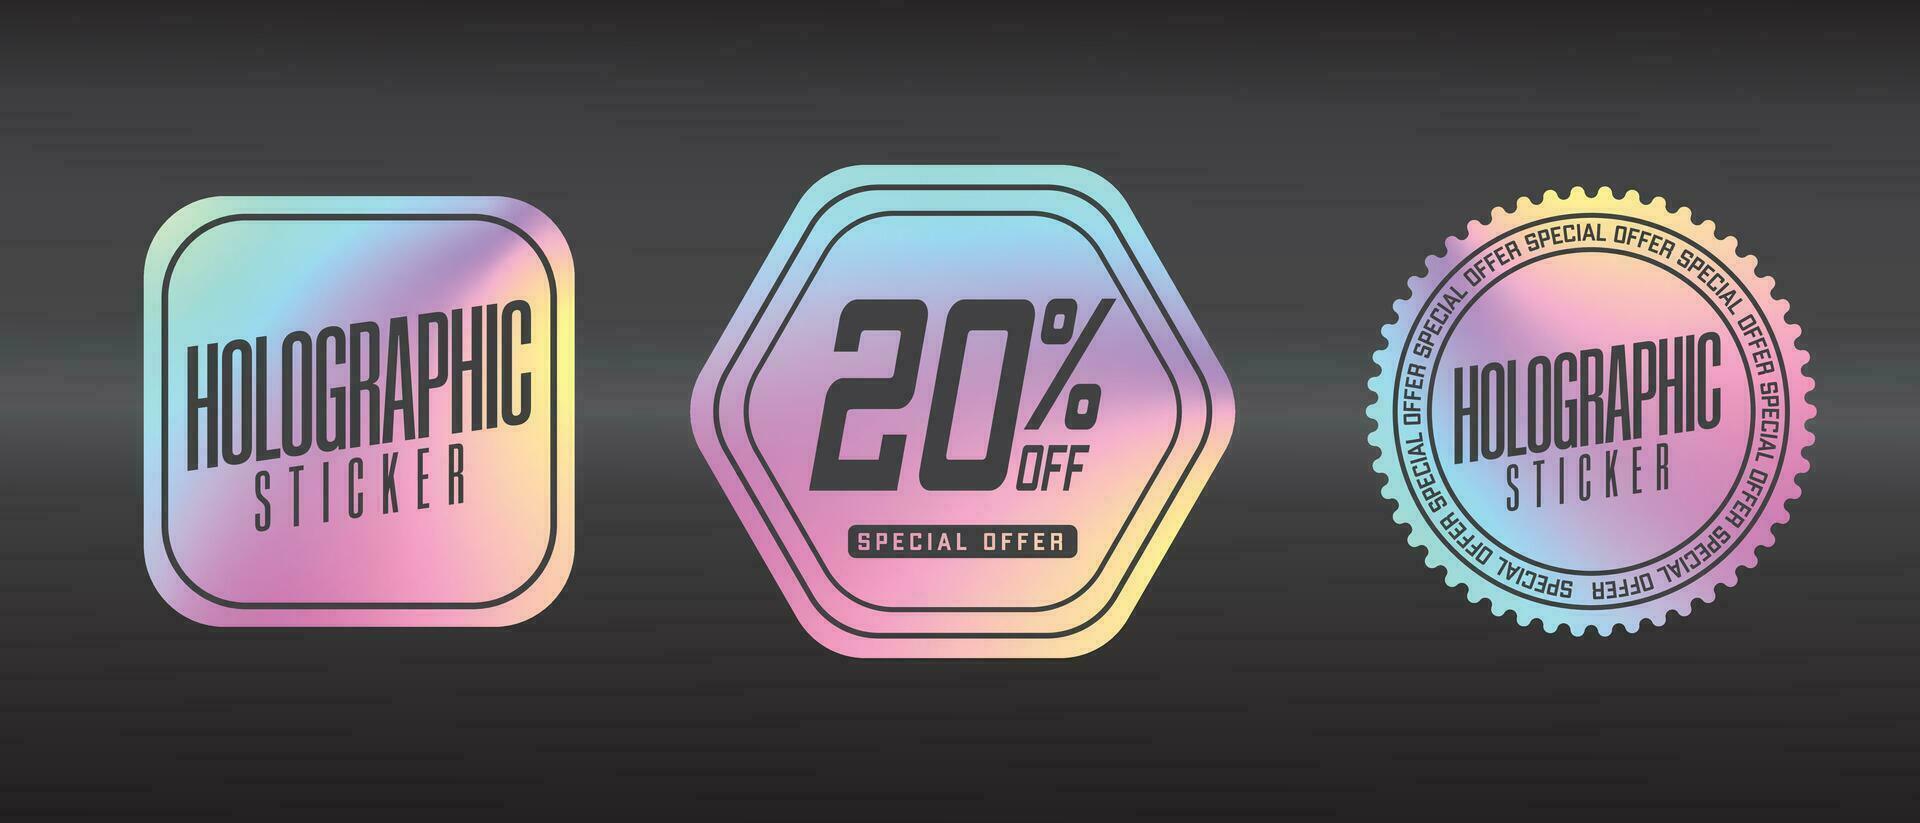 Holographic stickers and label with print ready in shapes vector